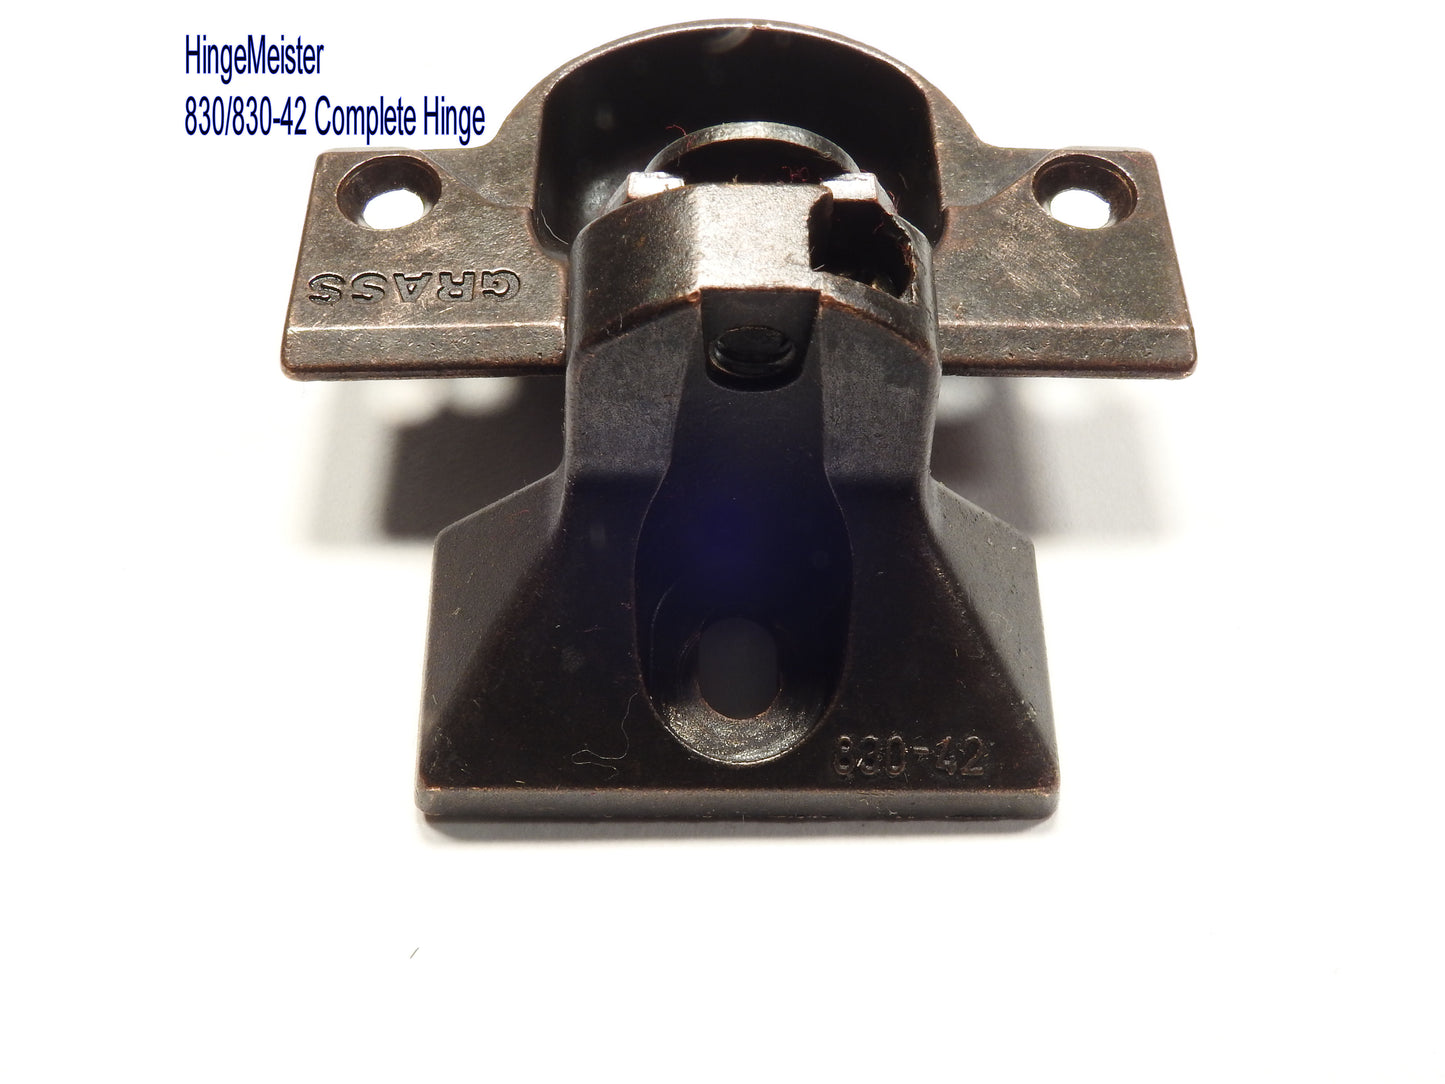 Grass 830-42 Bronze Hinge and mounting plate - Complete Hinge - Refurbished